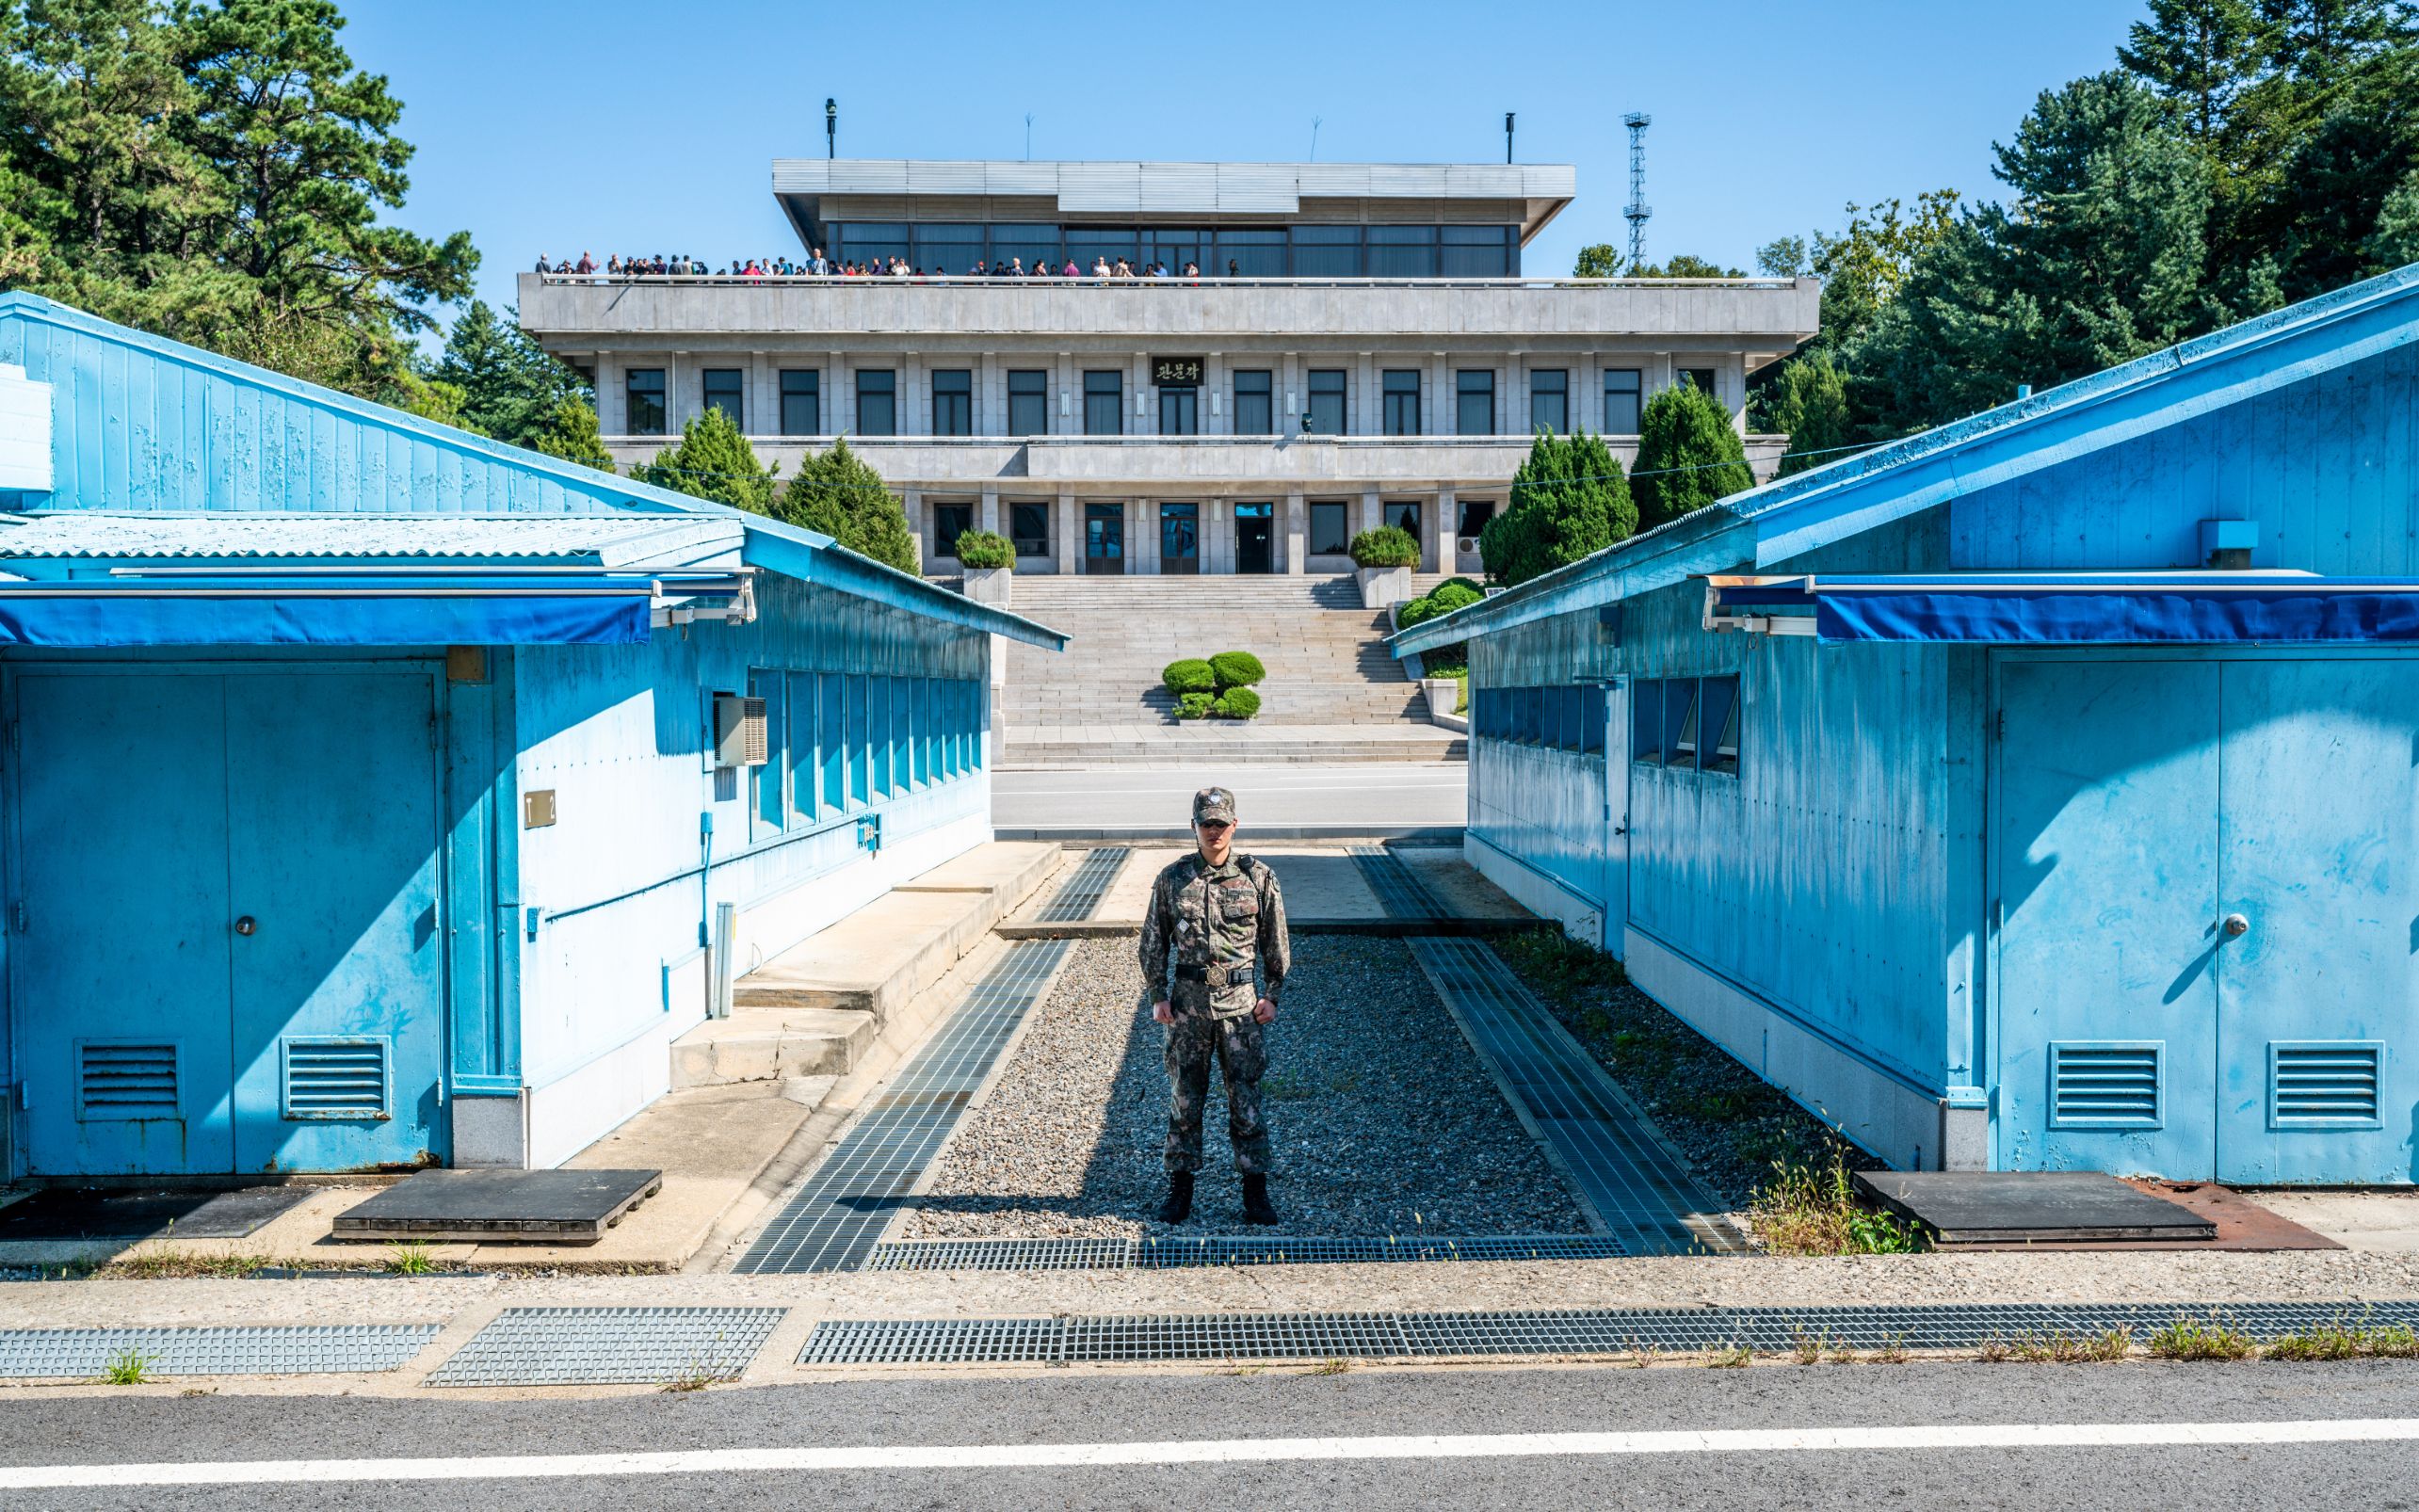 JSA Korea, 24 September 2019 : Border between the North and South Korea at the Joint Security Area or Panmunjom with blue huts and demarcation line in DMZ South Korea